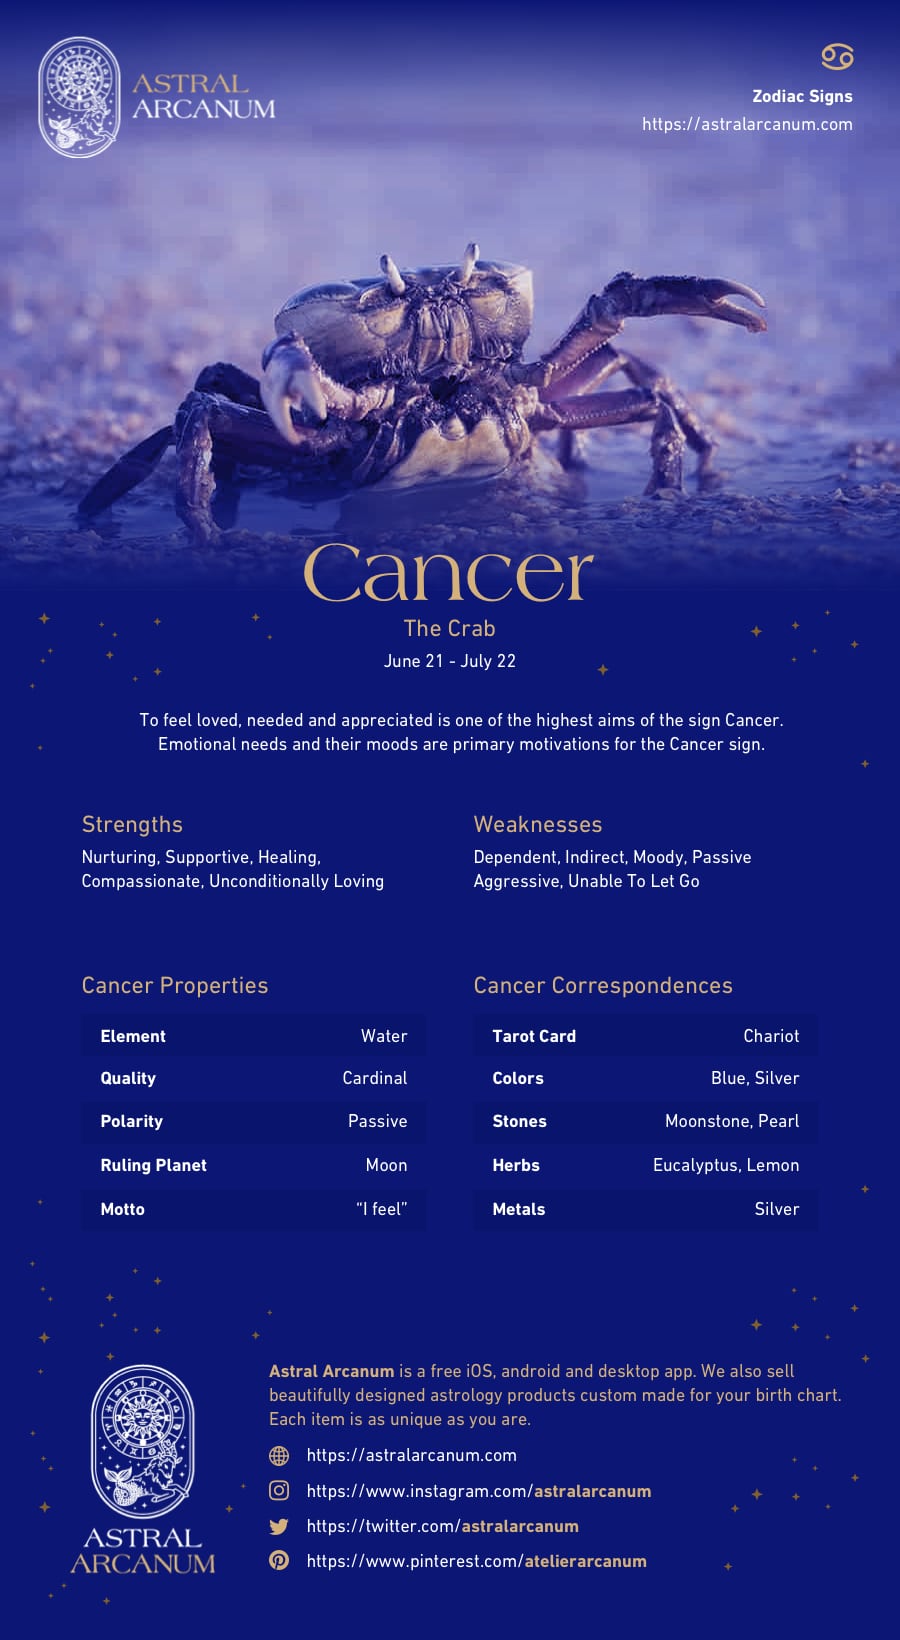 Astrology Zodiac Sign Cancer Infographic - Cancer Personality, Cancer Careers, Cancer Work, Cancer Correspondences